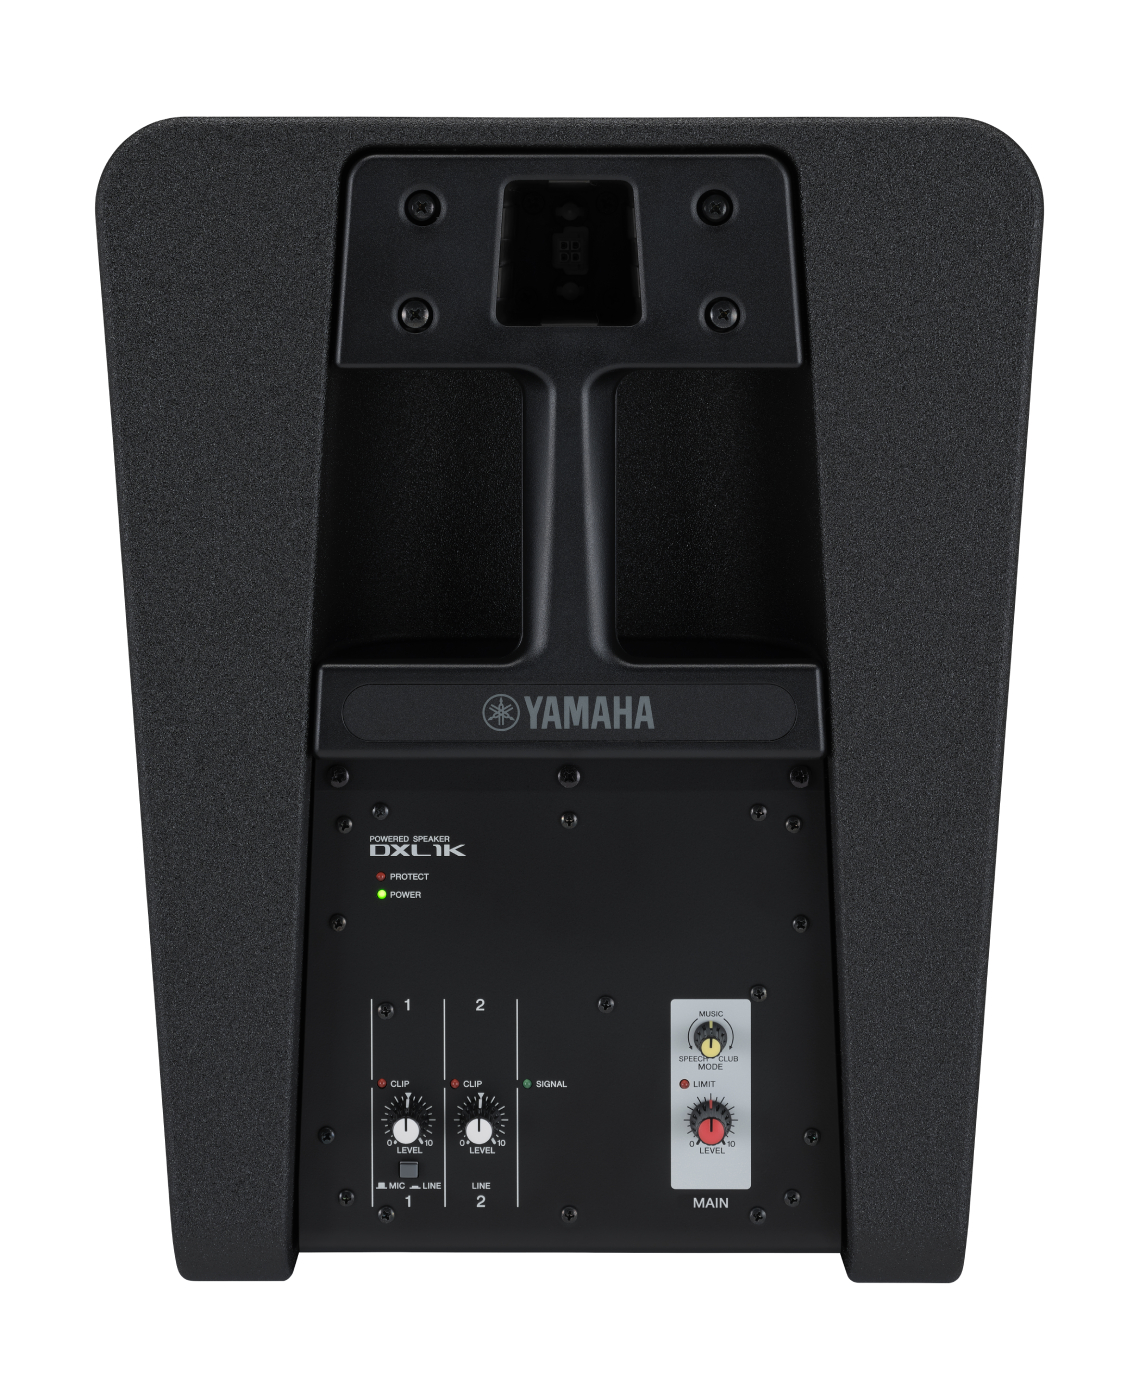 Yamaha Dxl 1k + Cover - Systemes Colonnes - Variation 4